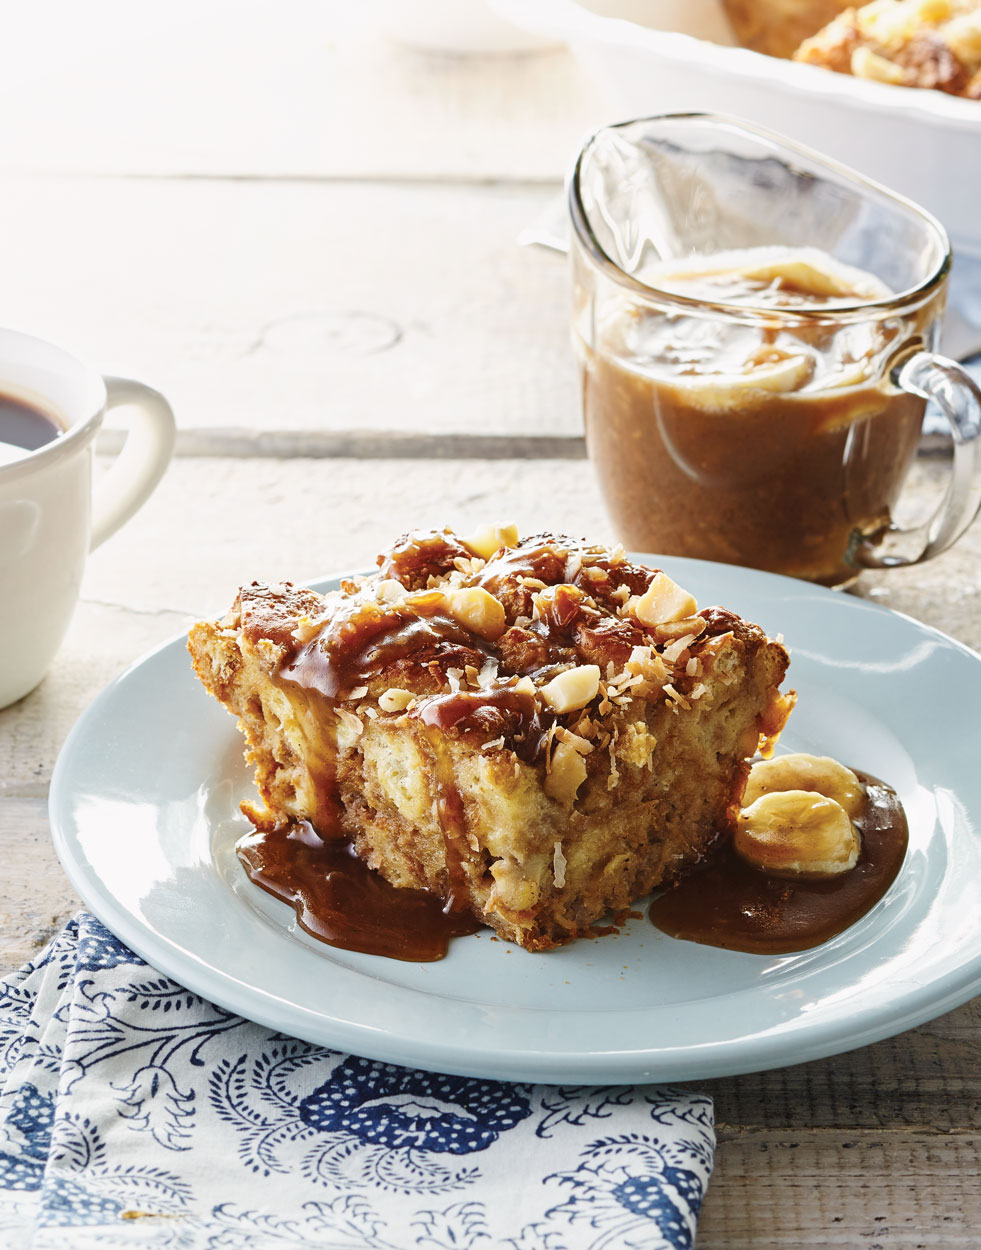 Coconut-Banana Bread Pudding with Coconut-Caramel Sauce